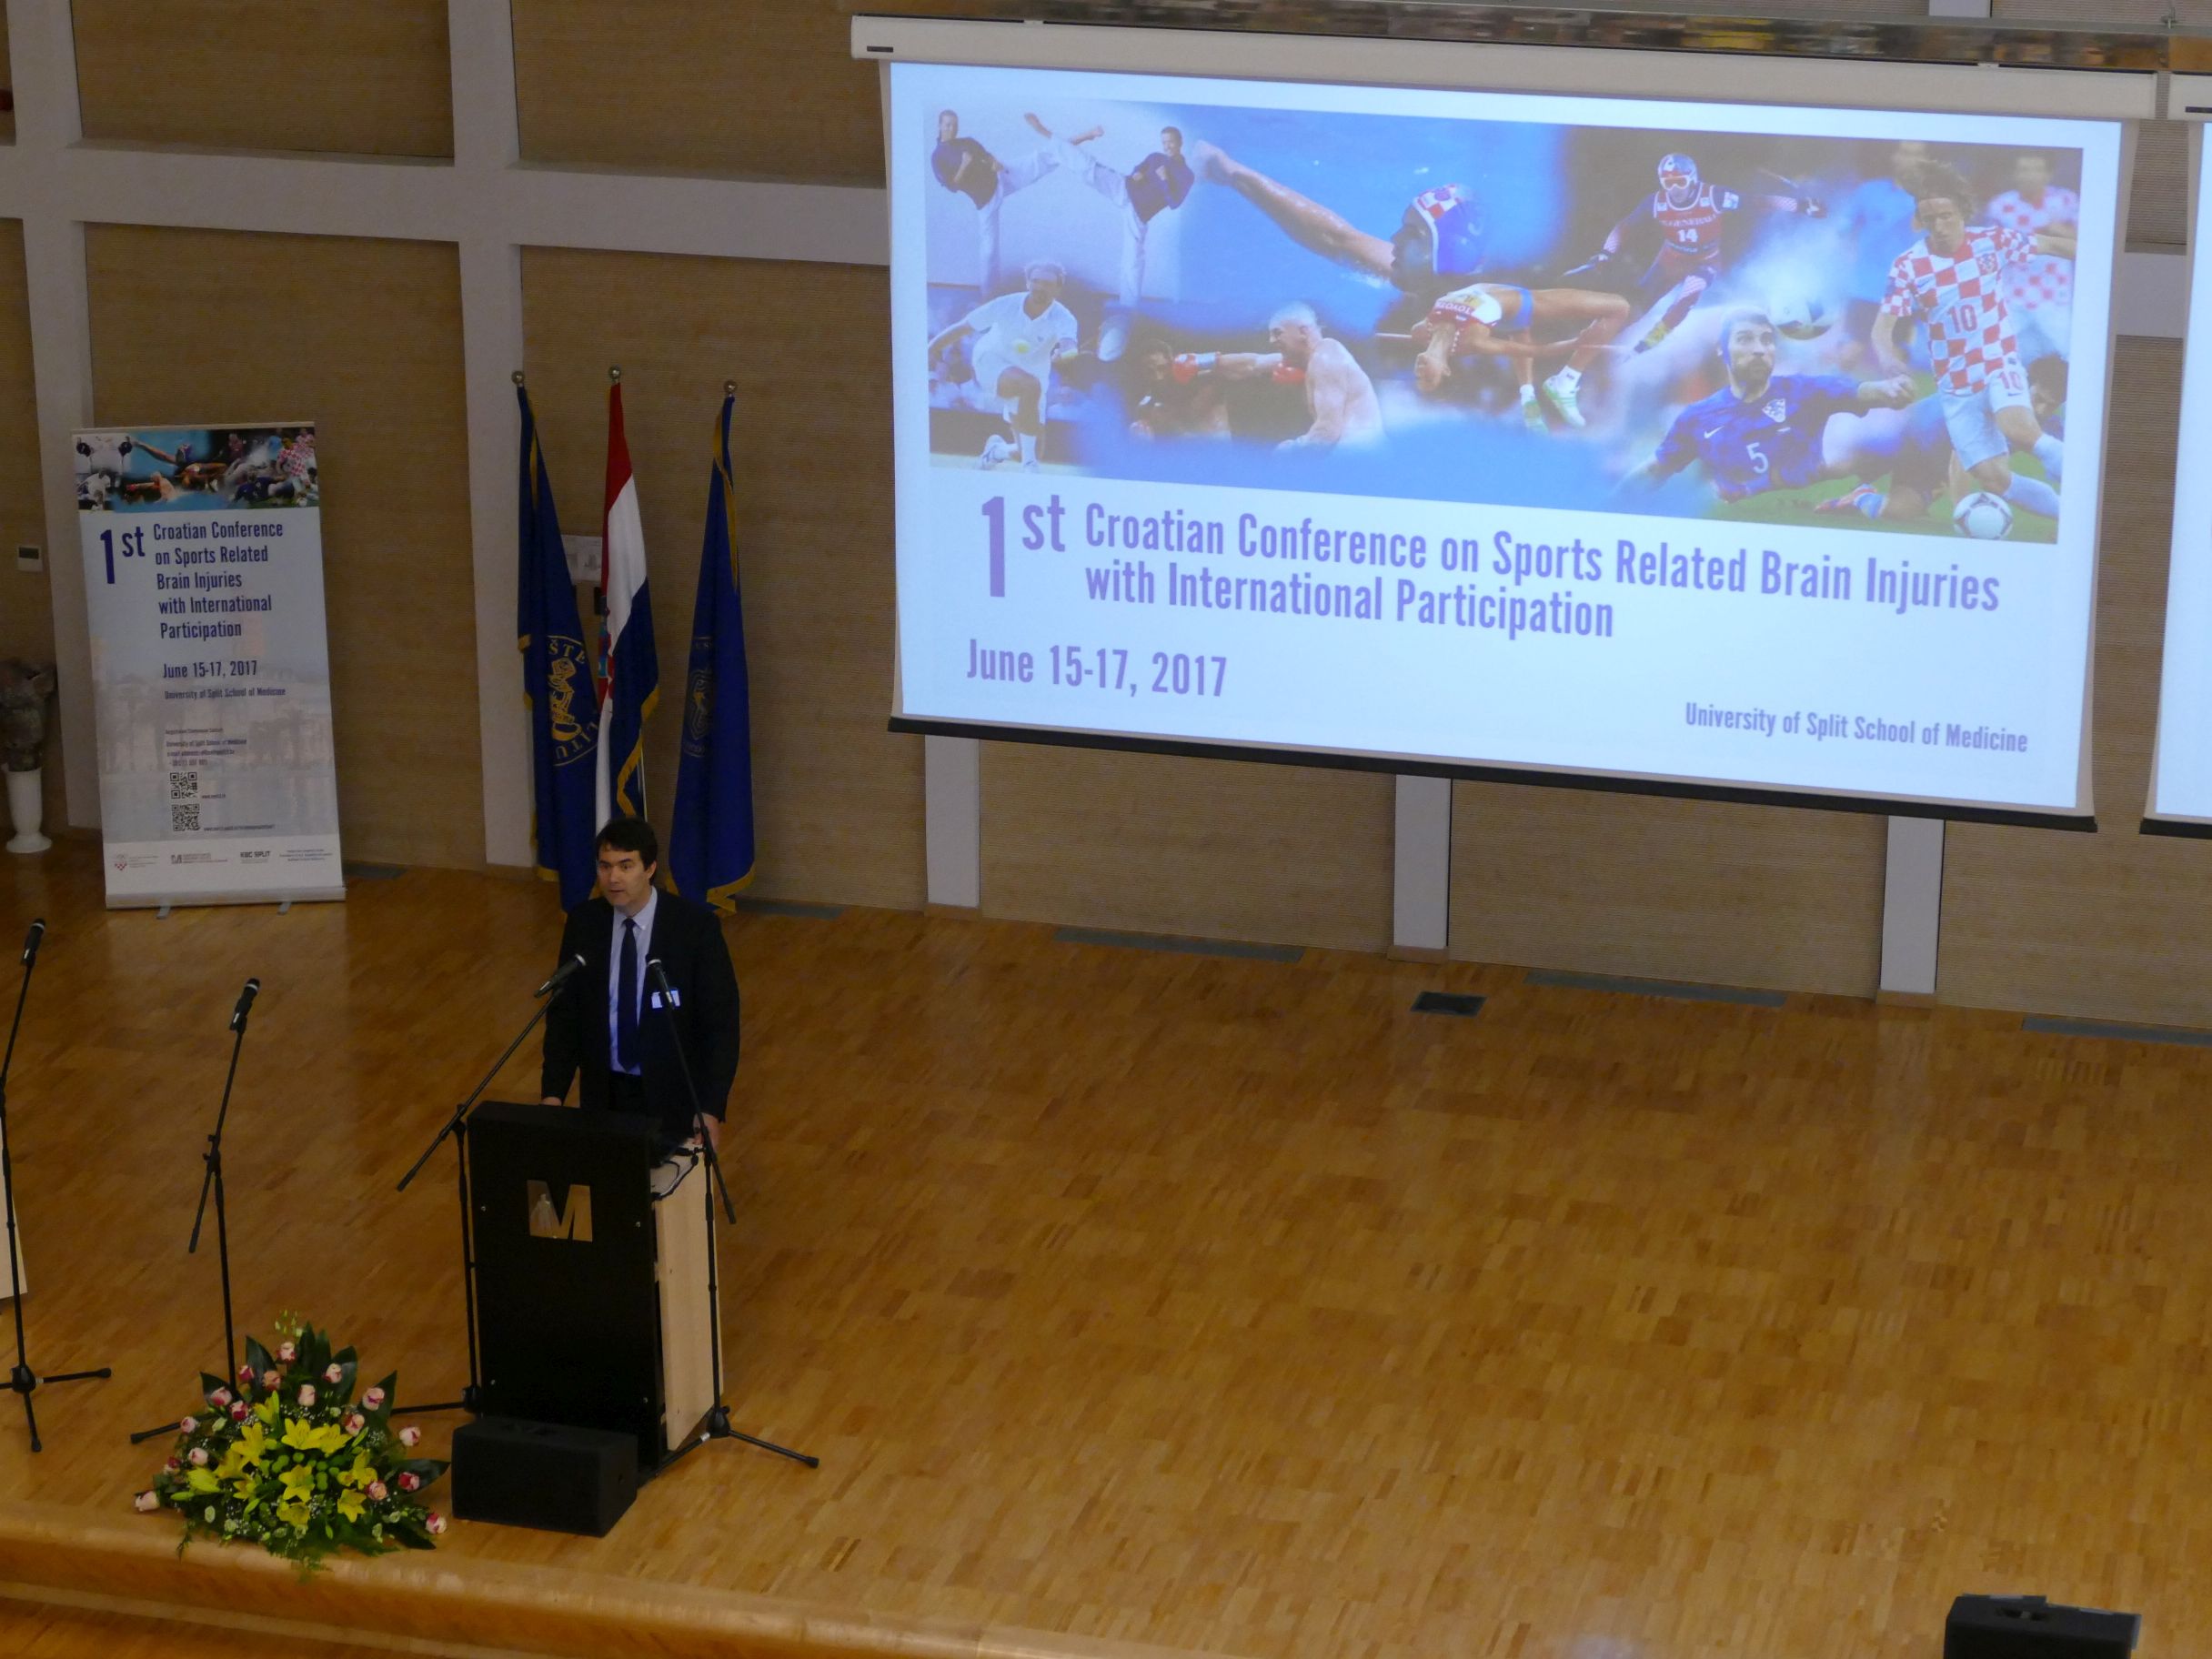 1st Croatian Conference on Sports Related Brain Injuries, June 15-17, 2017 - Photo Gallery